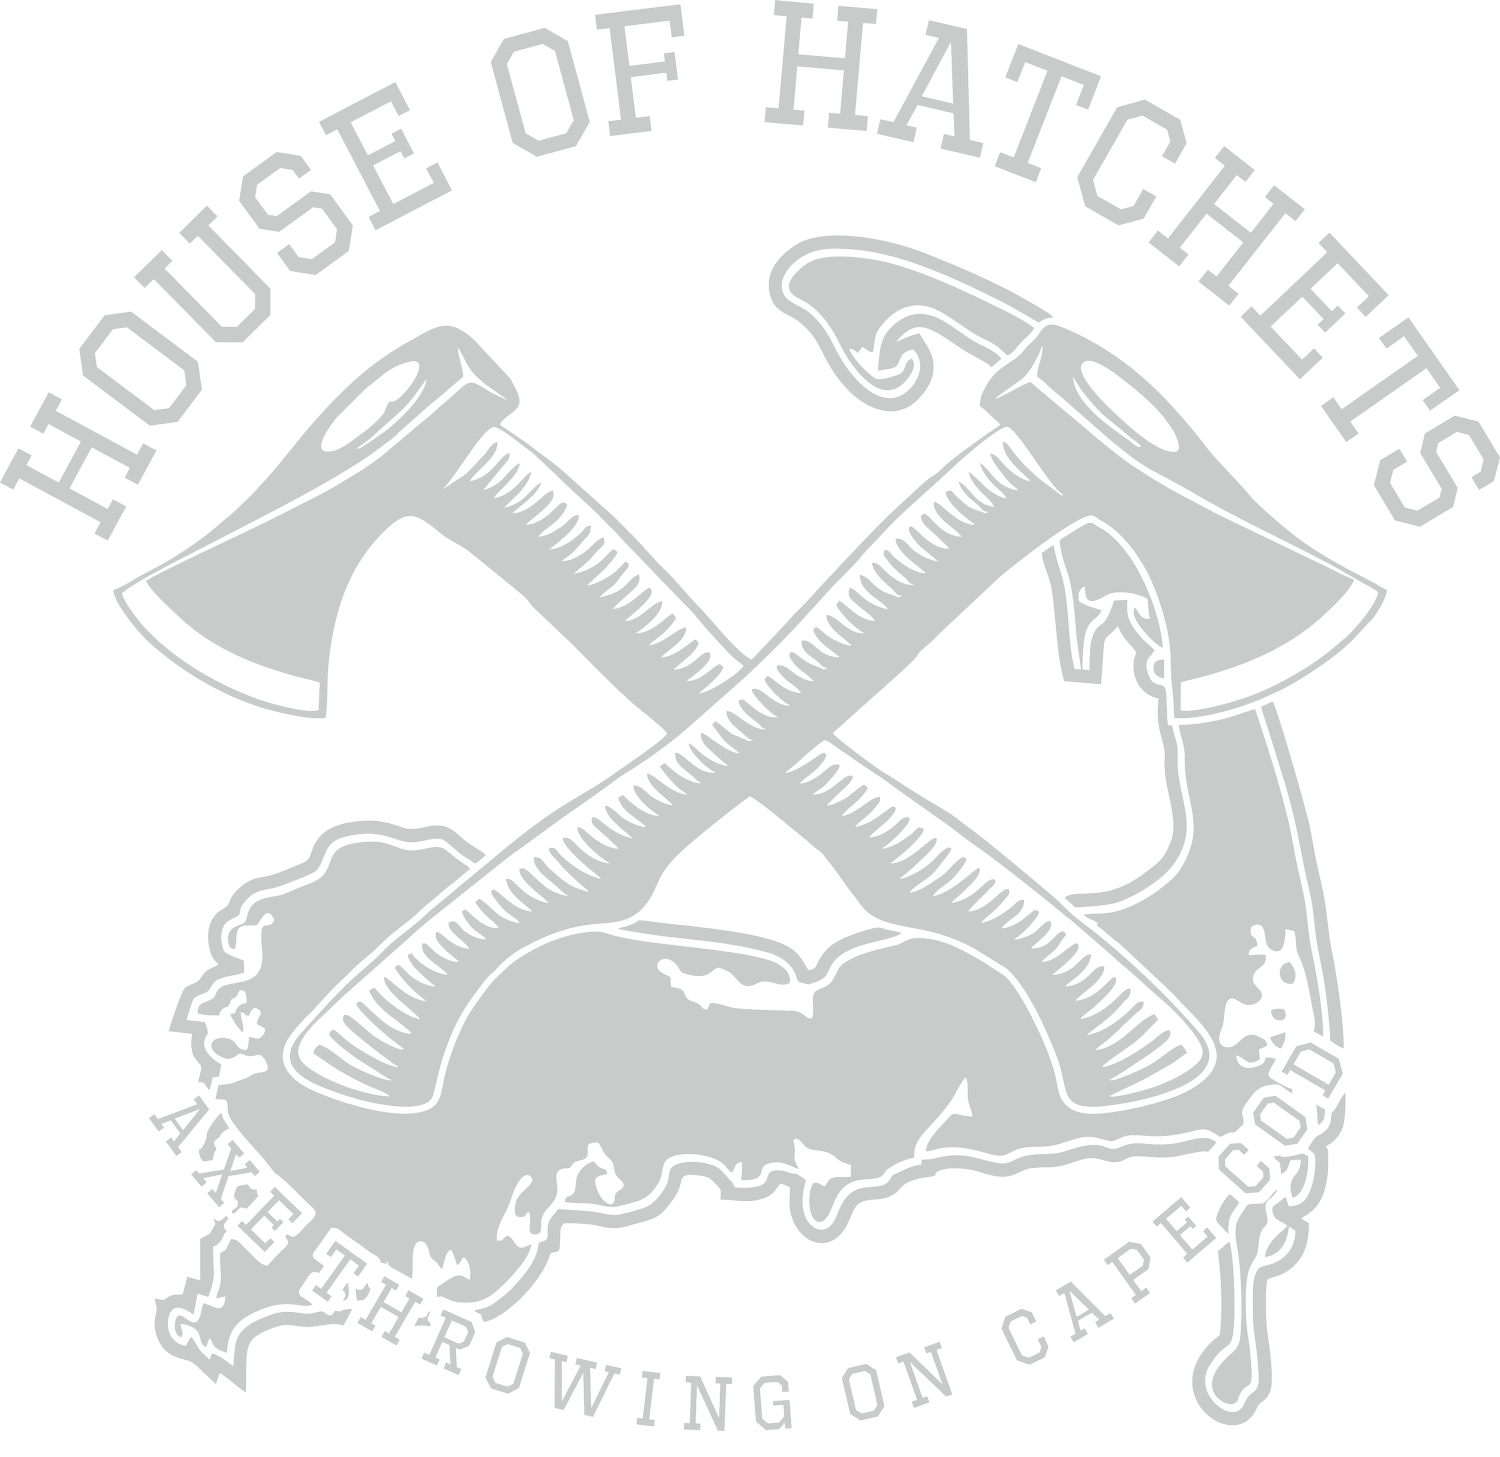 House of Hatchets - Axe Throwing on Cape Cod